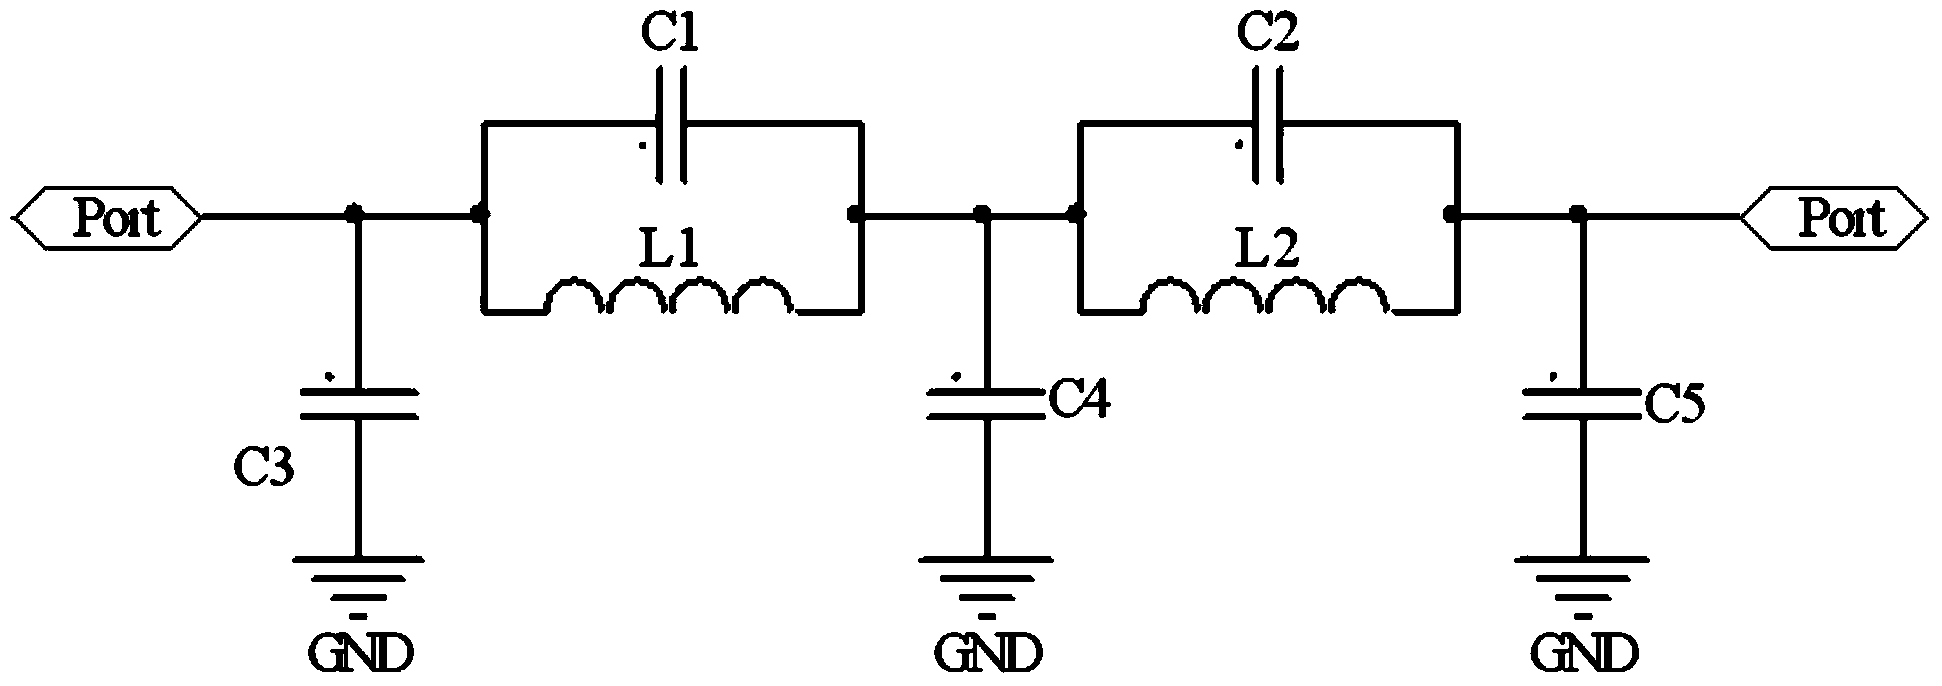 Sub-1G radio frequency front-end circuit design based on RF energy detection and parameter adjustment method based on RF energy detection